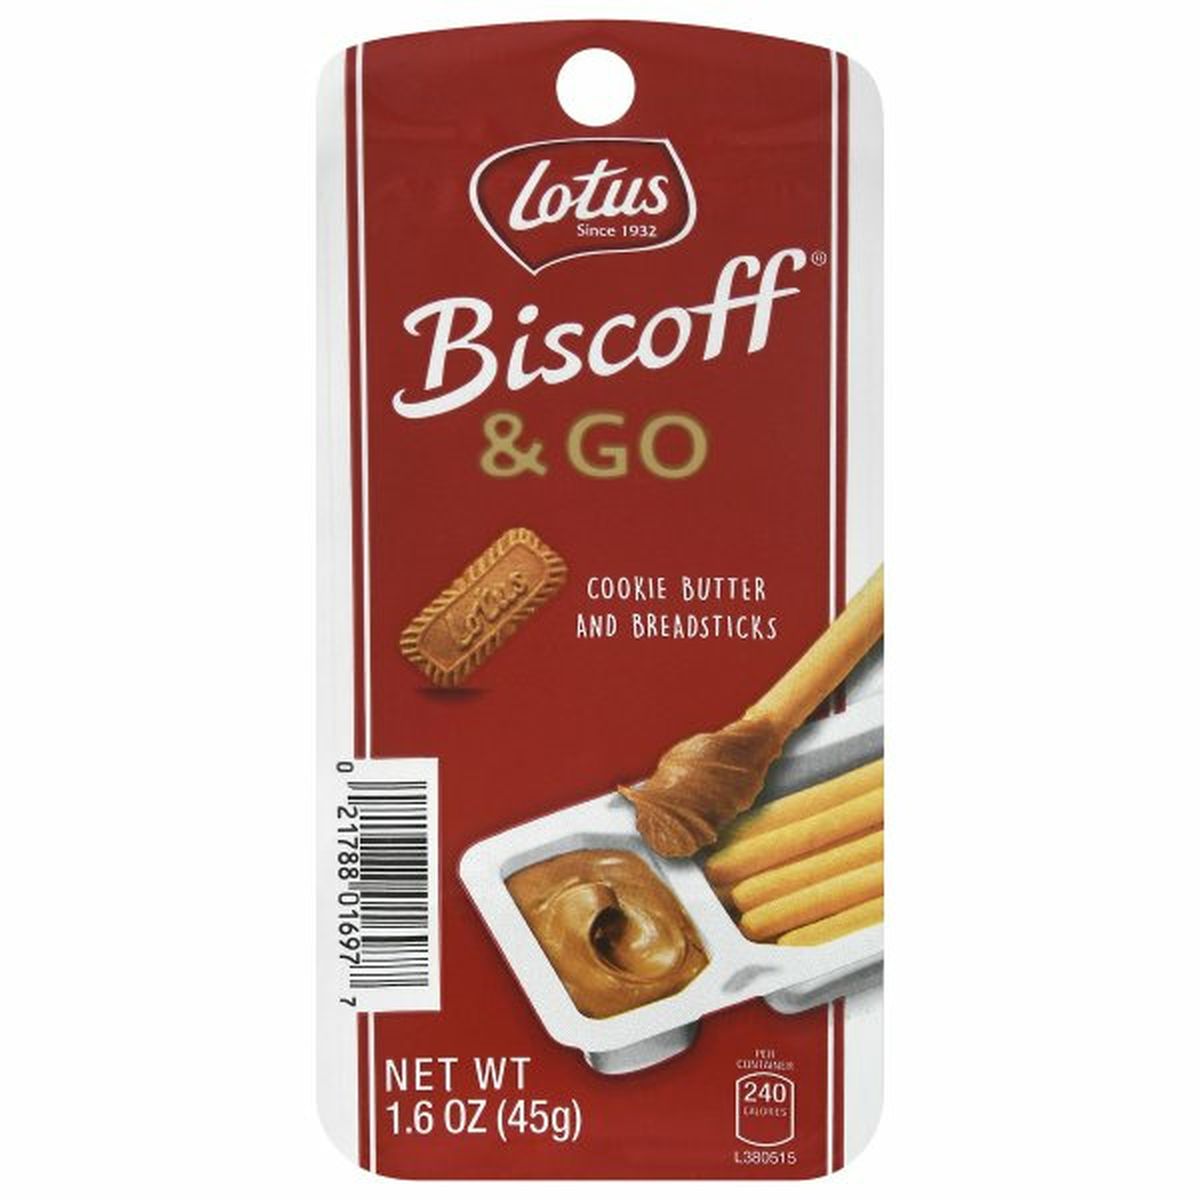 Calories in Biscoff & Go Cookie Butter and Breadsticks